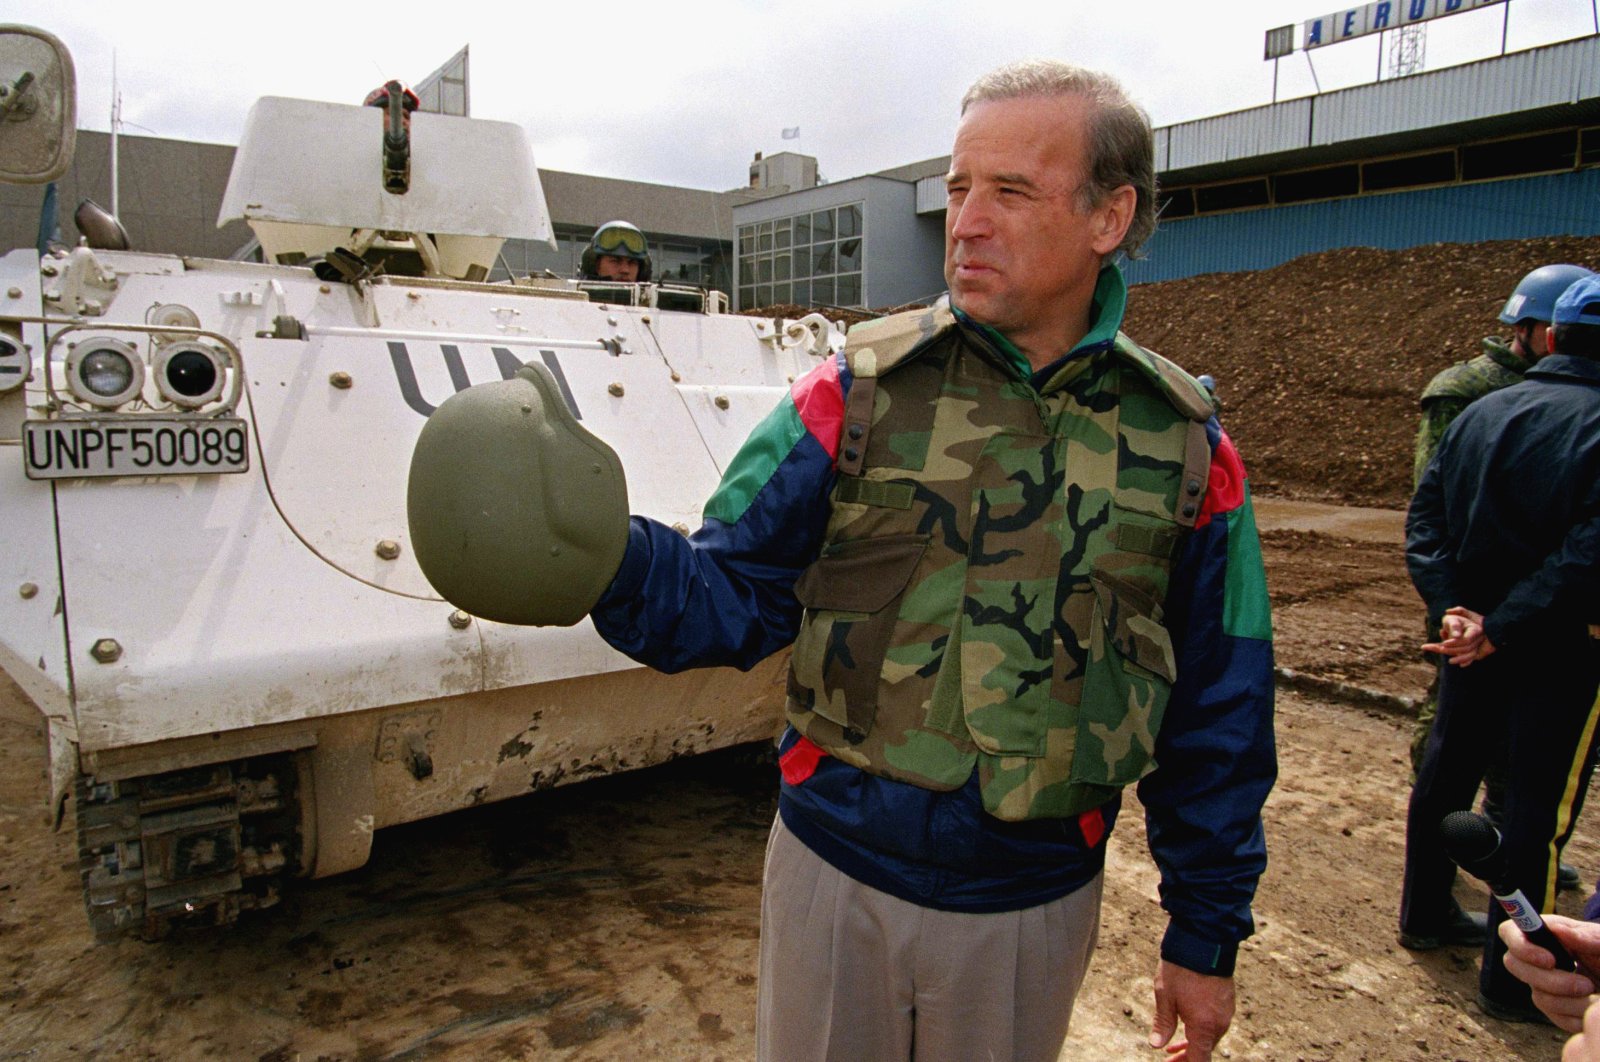 Sen. Joe Biden (D-Del.) stands in front of a Danish armored personnel carrier at the U.N.-controlled Sarajevo Airport, April 9, 1993, making a statement about his trip to the besieged Bosnian capital. (AP Photo)